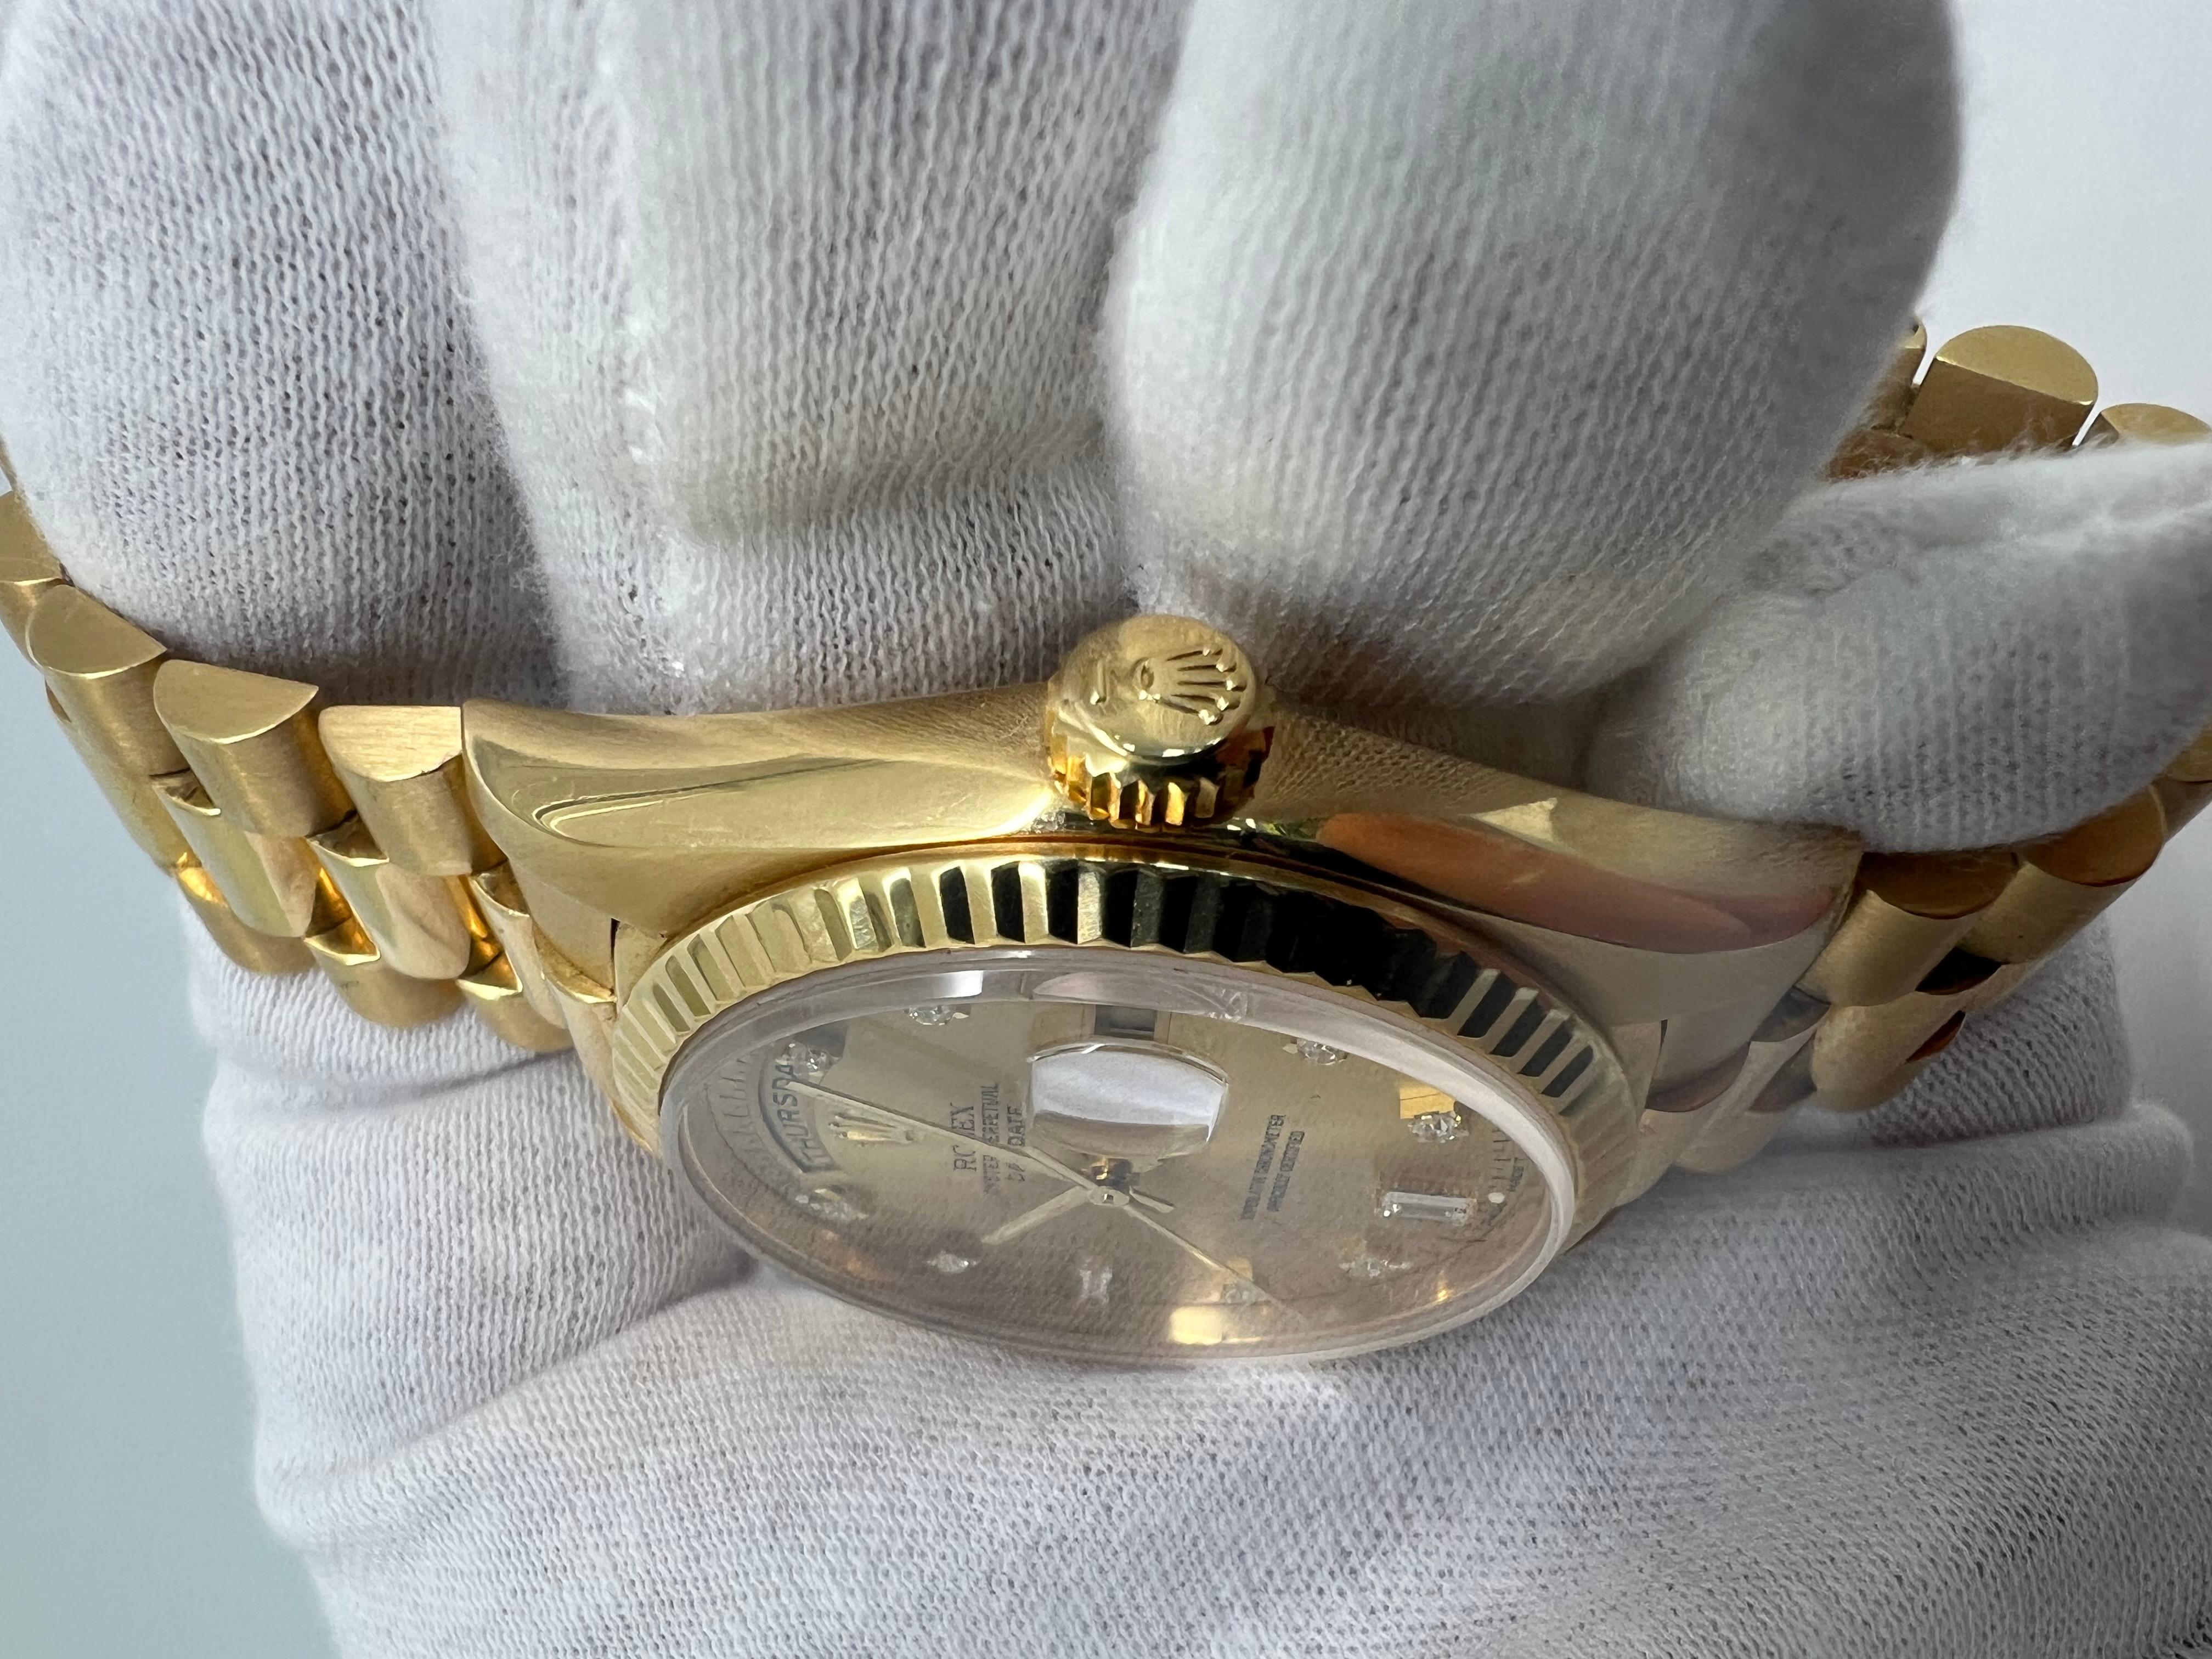 Rolex Daydate 36mm Diamond Dial Factory Watch

all original Rolex parts

factory diamond baguette dial

double quick set movement!

tight bracelet

Excellent condition 

comes with Rolex Box and 2 year warranty on movement

shop with